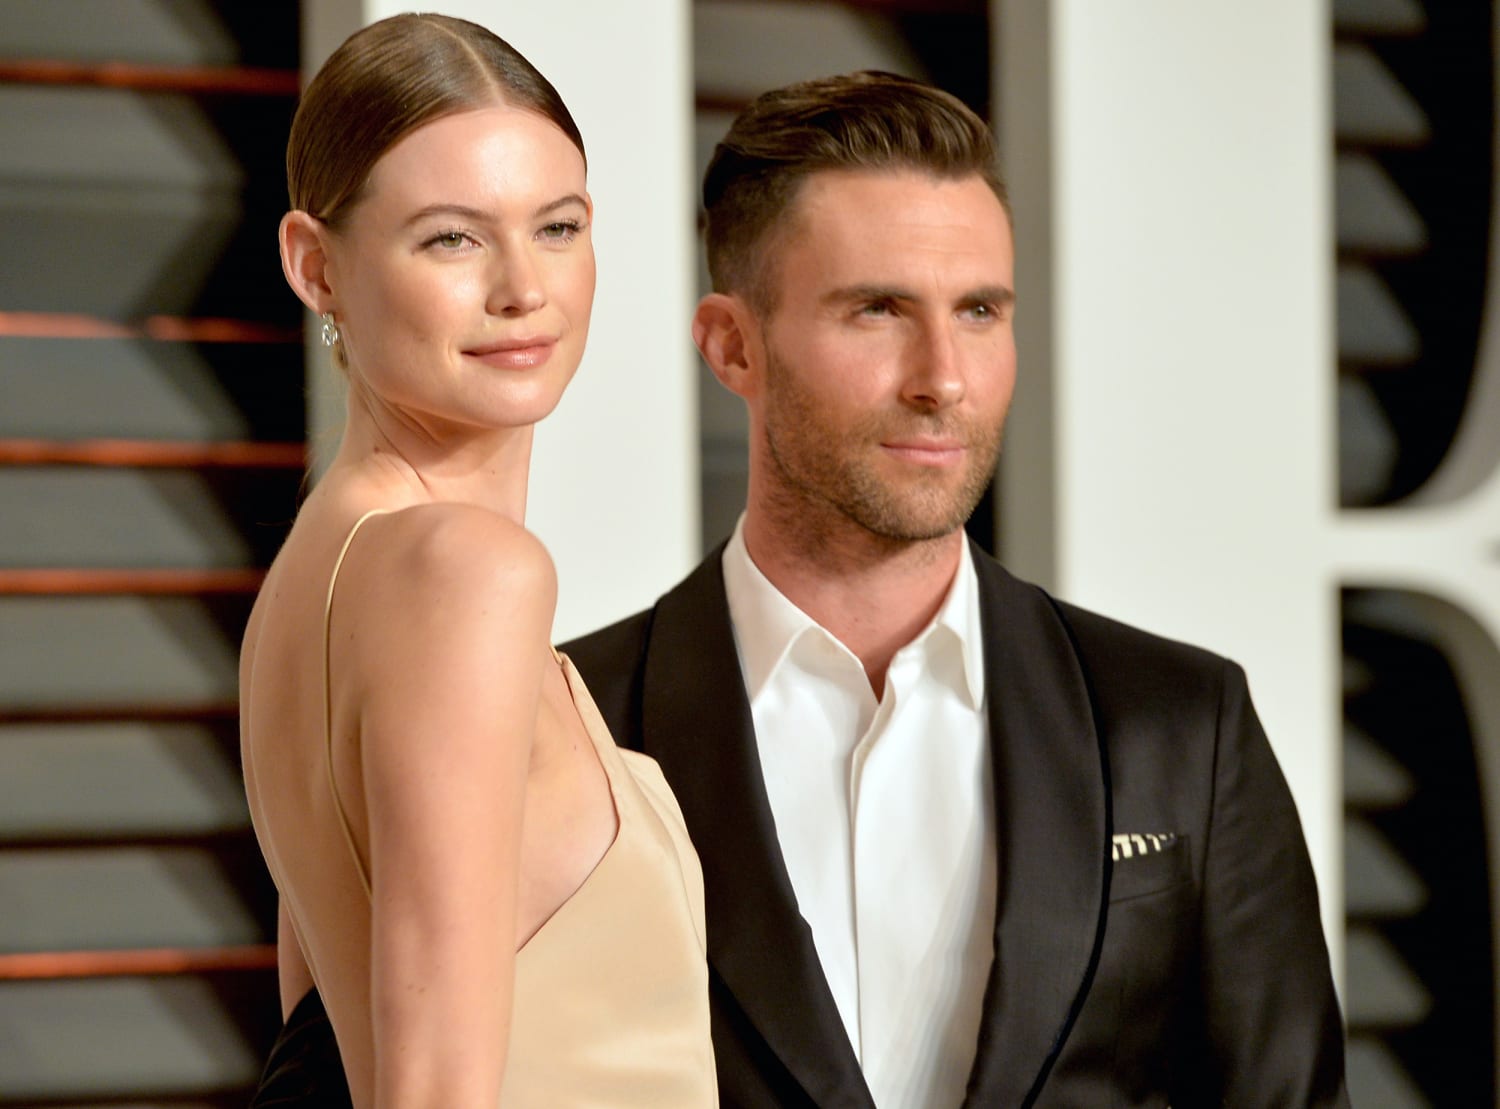 What Adam Levine and Behati Prinsloo Have Said About Relationship